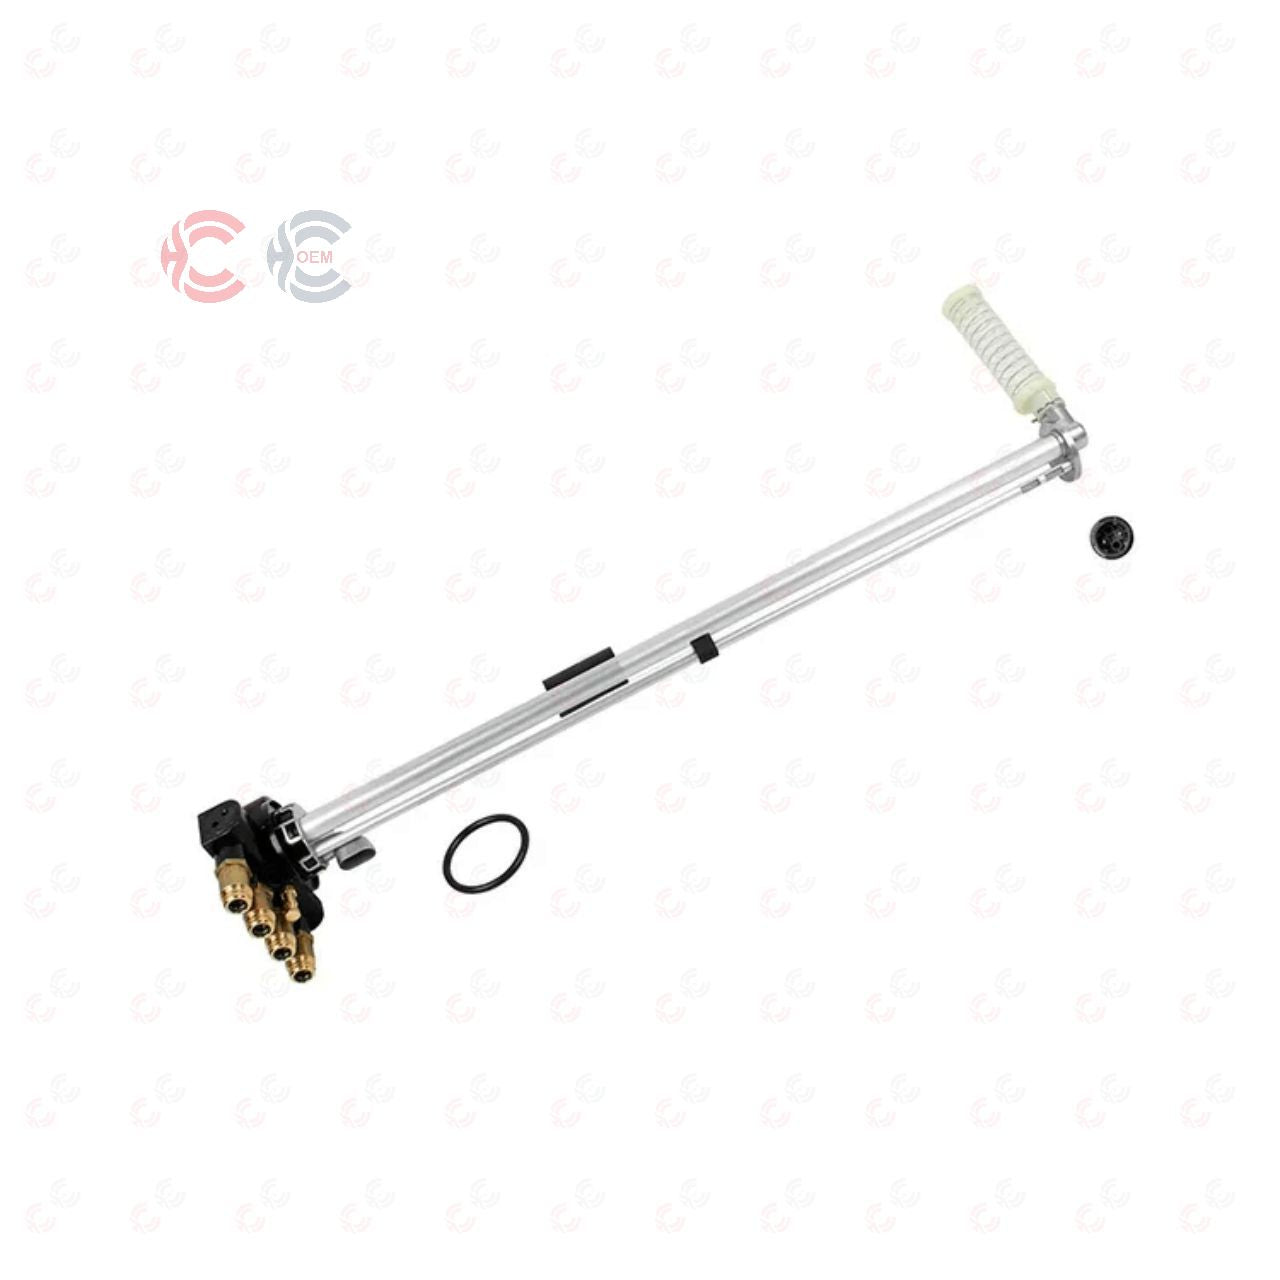 OEM: 1500199Material: ABS metalColor: Black GoldenOrigin: Made in ChinaWeight: 1000gPacking List: 1* Fuel Level Sensor More ServiceWe can provide OEM Manufacturing serviceWe can Be your one-step solution for Auto PartsWe can provide technical scheme for you Feel Free to Contact Us, we will get back to you as soon as possible.